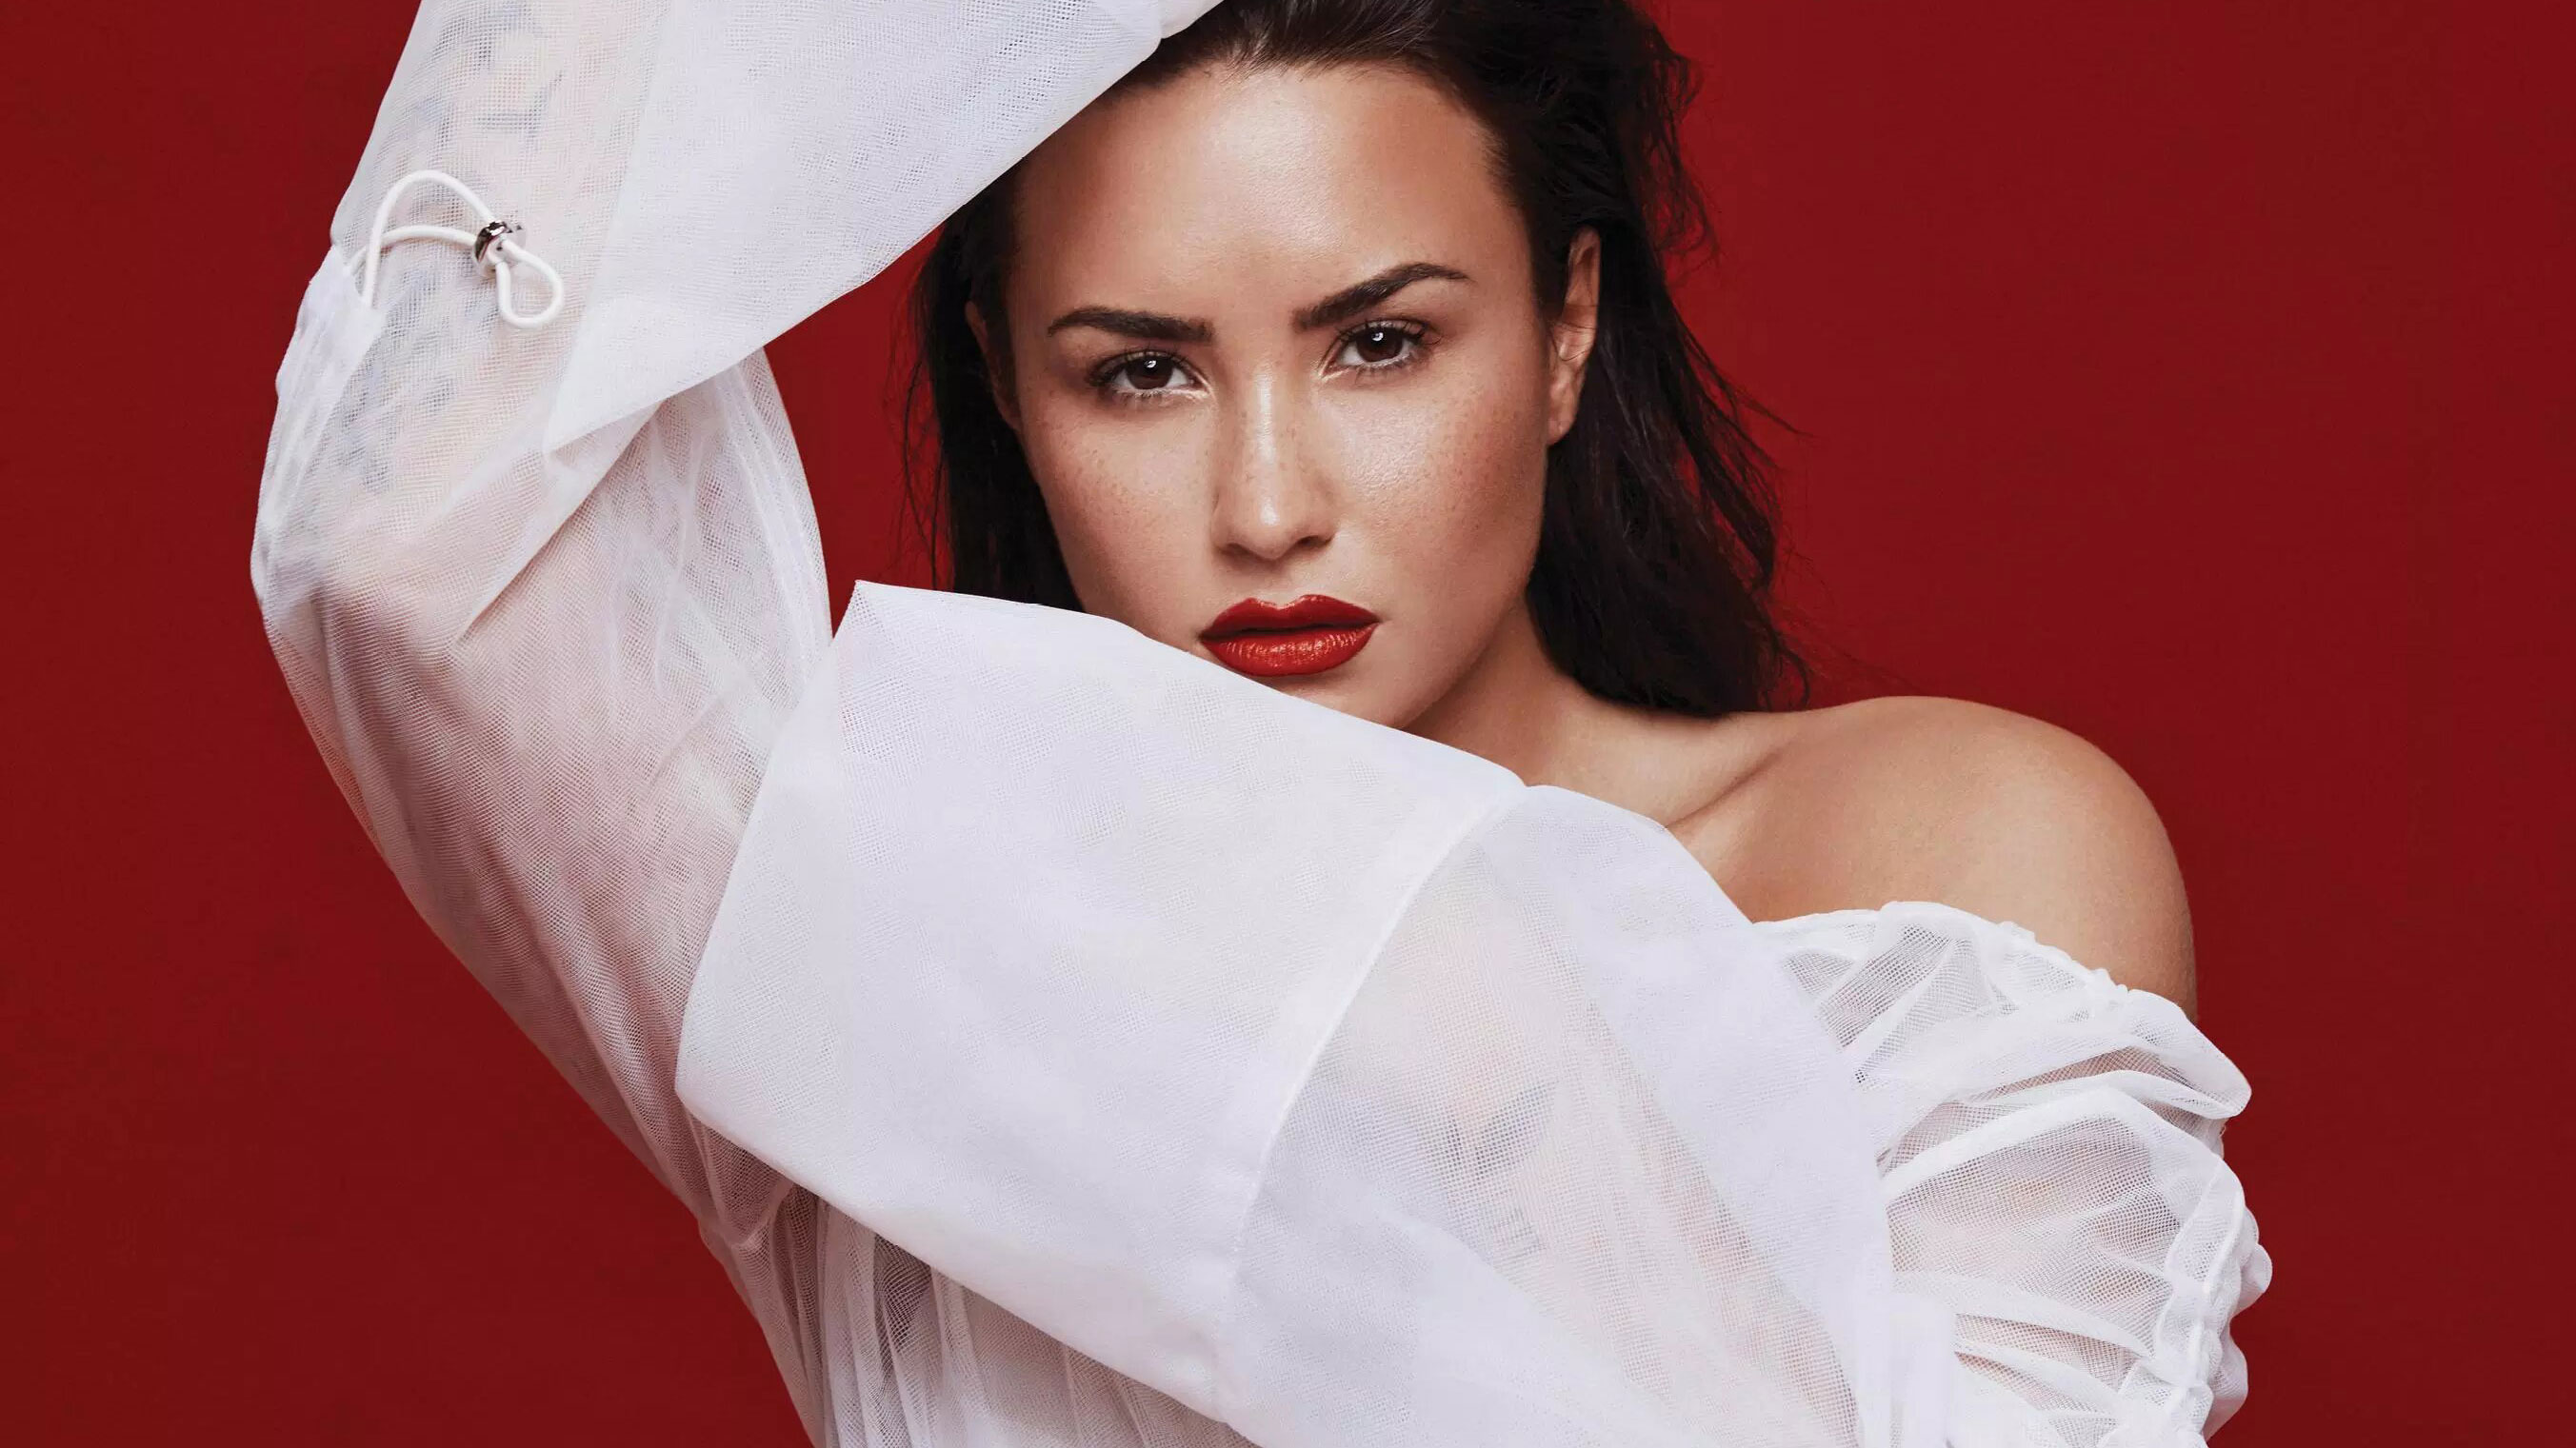 Demi lovato new hd celebrities k wallpapers images backgrounds photos and pictures